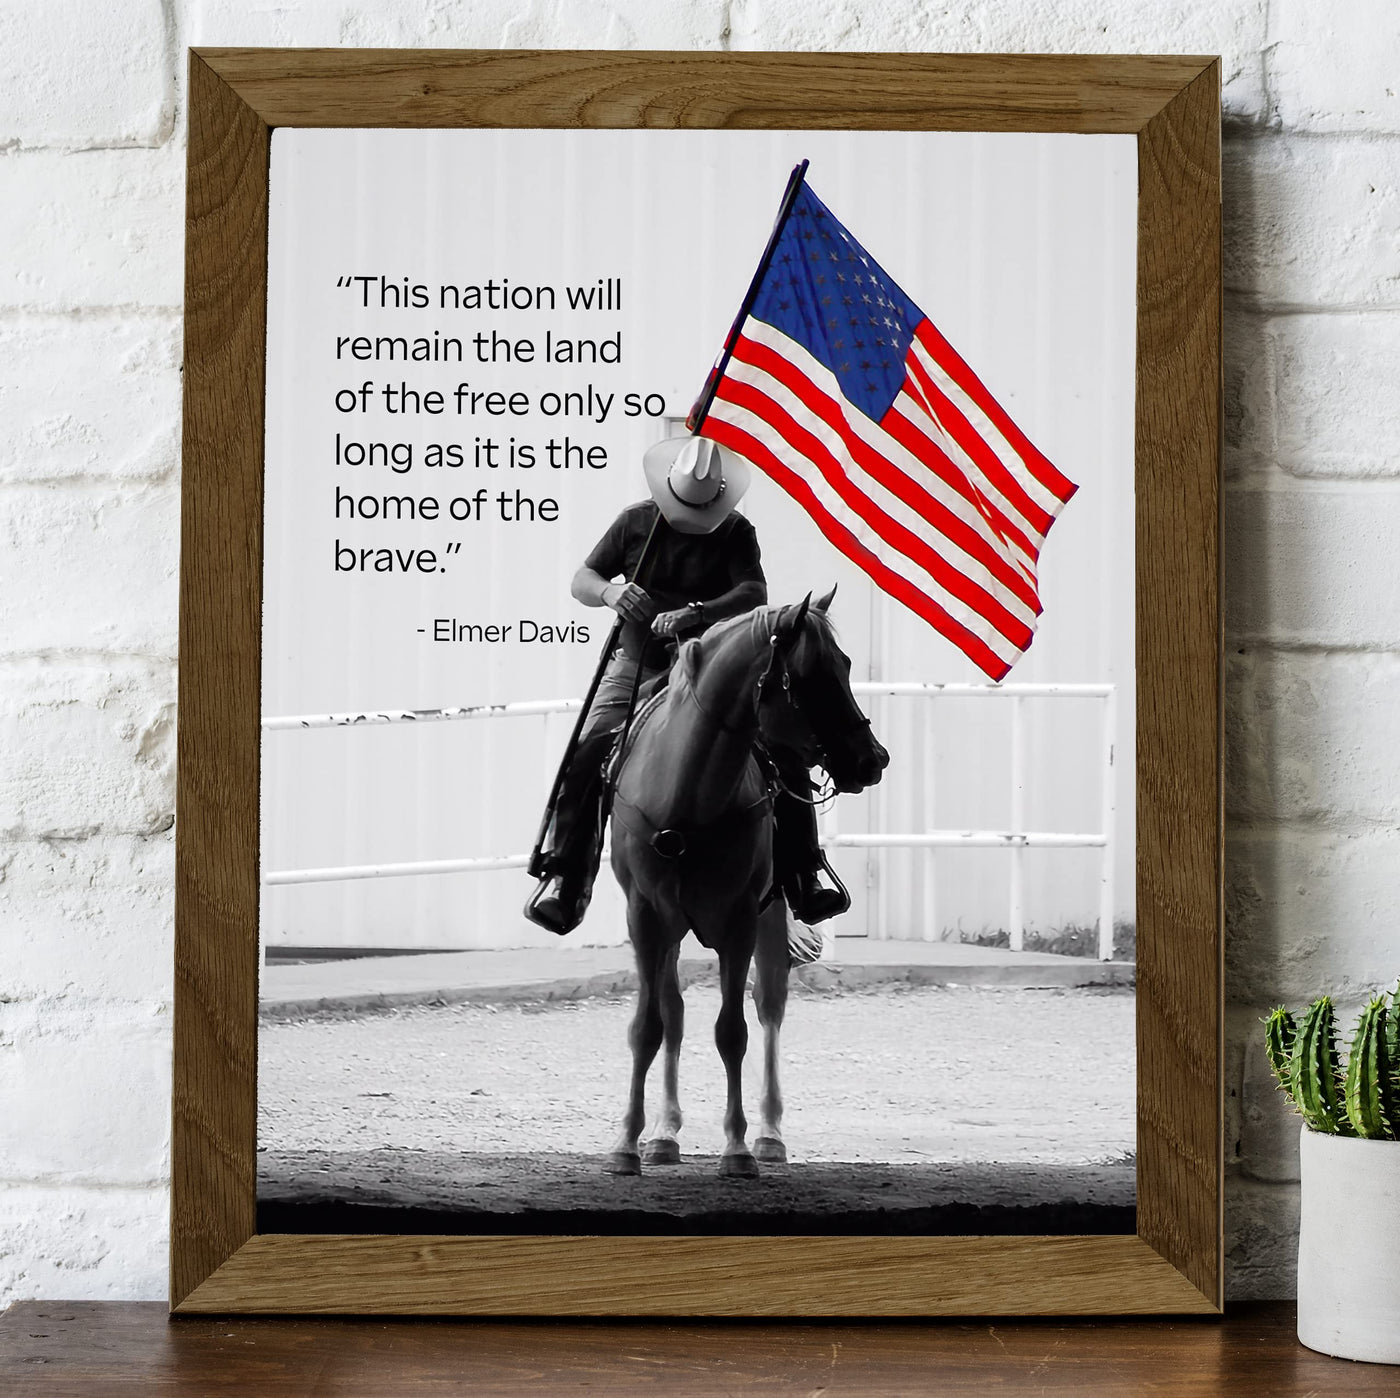 This Nation Will Remain Land of the Free- American Flag Wall Art -8x10" Patriotic Cowboy Riding Horse Picture Print -Ready to Frame. Home-Office-Bar-Cave-Western Decor! Great Gift for USA Pride!